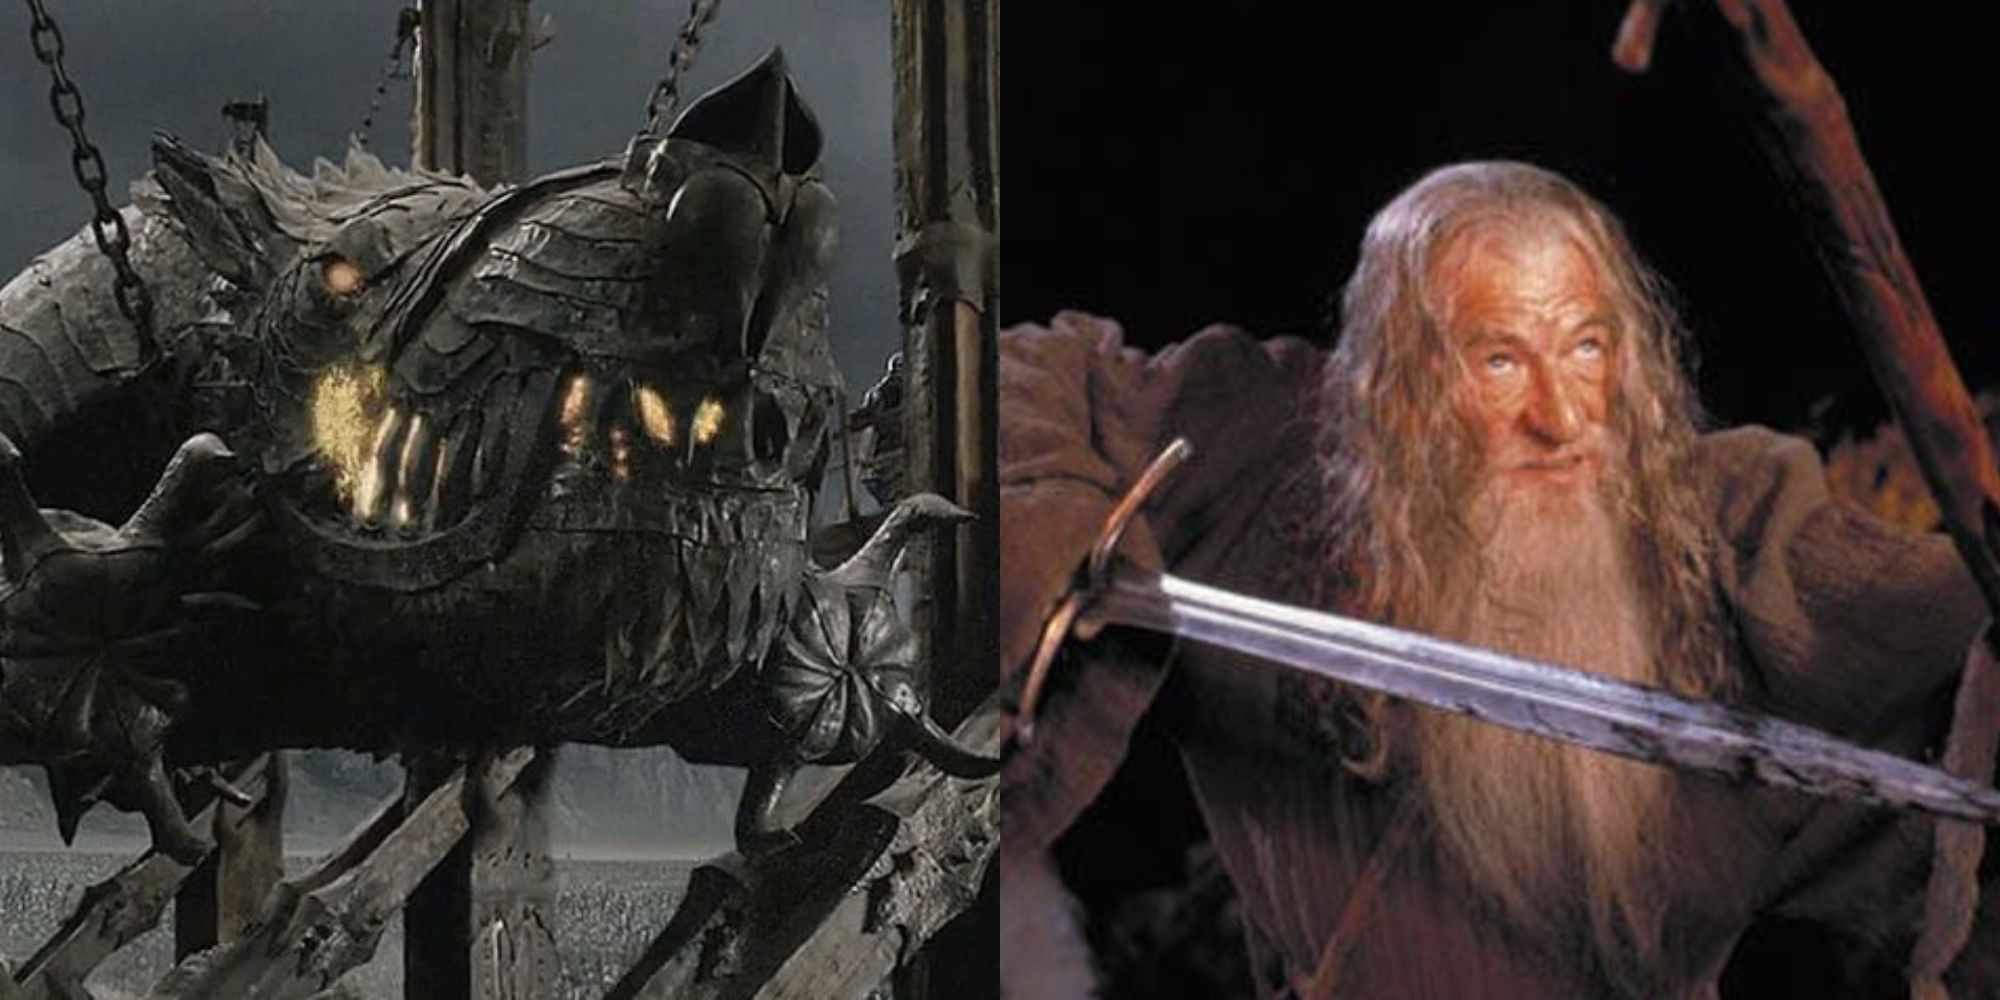 Movies at Swords - All three epic Lord of the Rings movies are